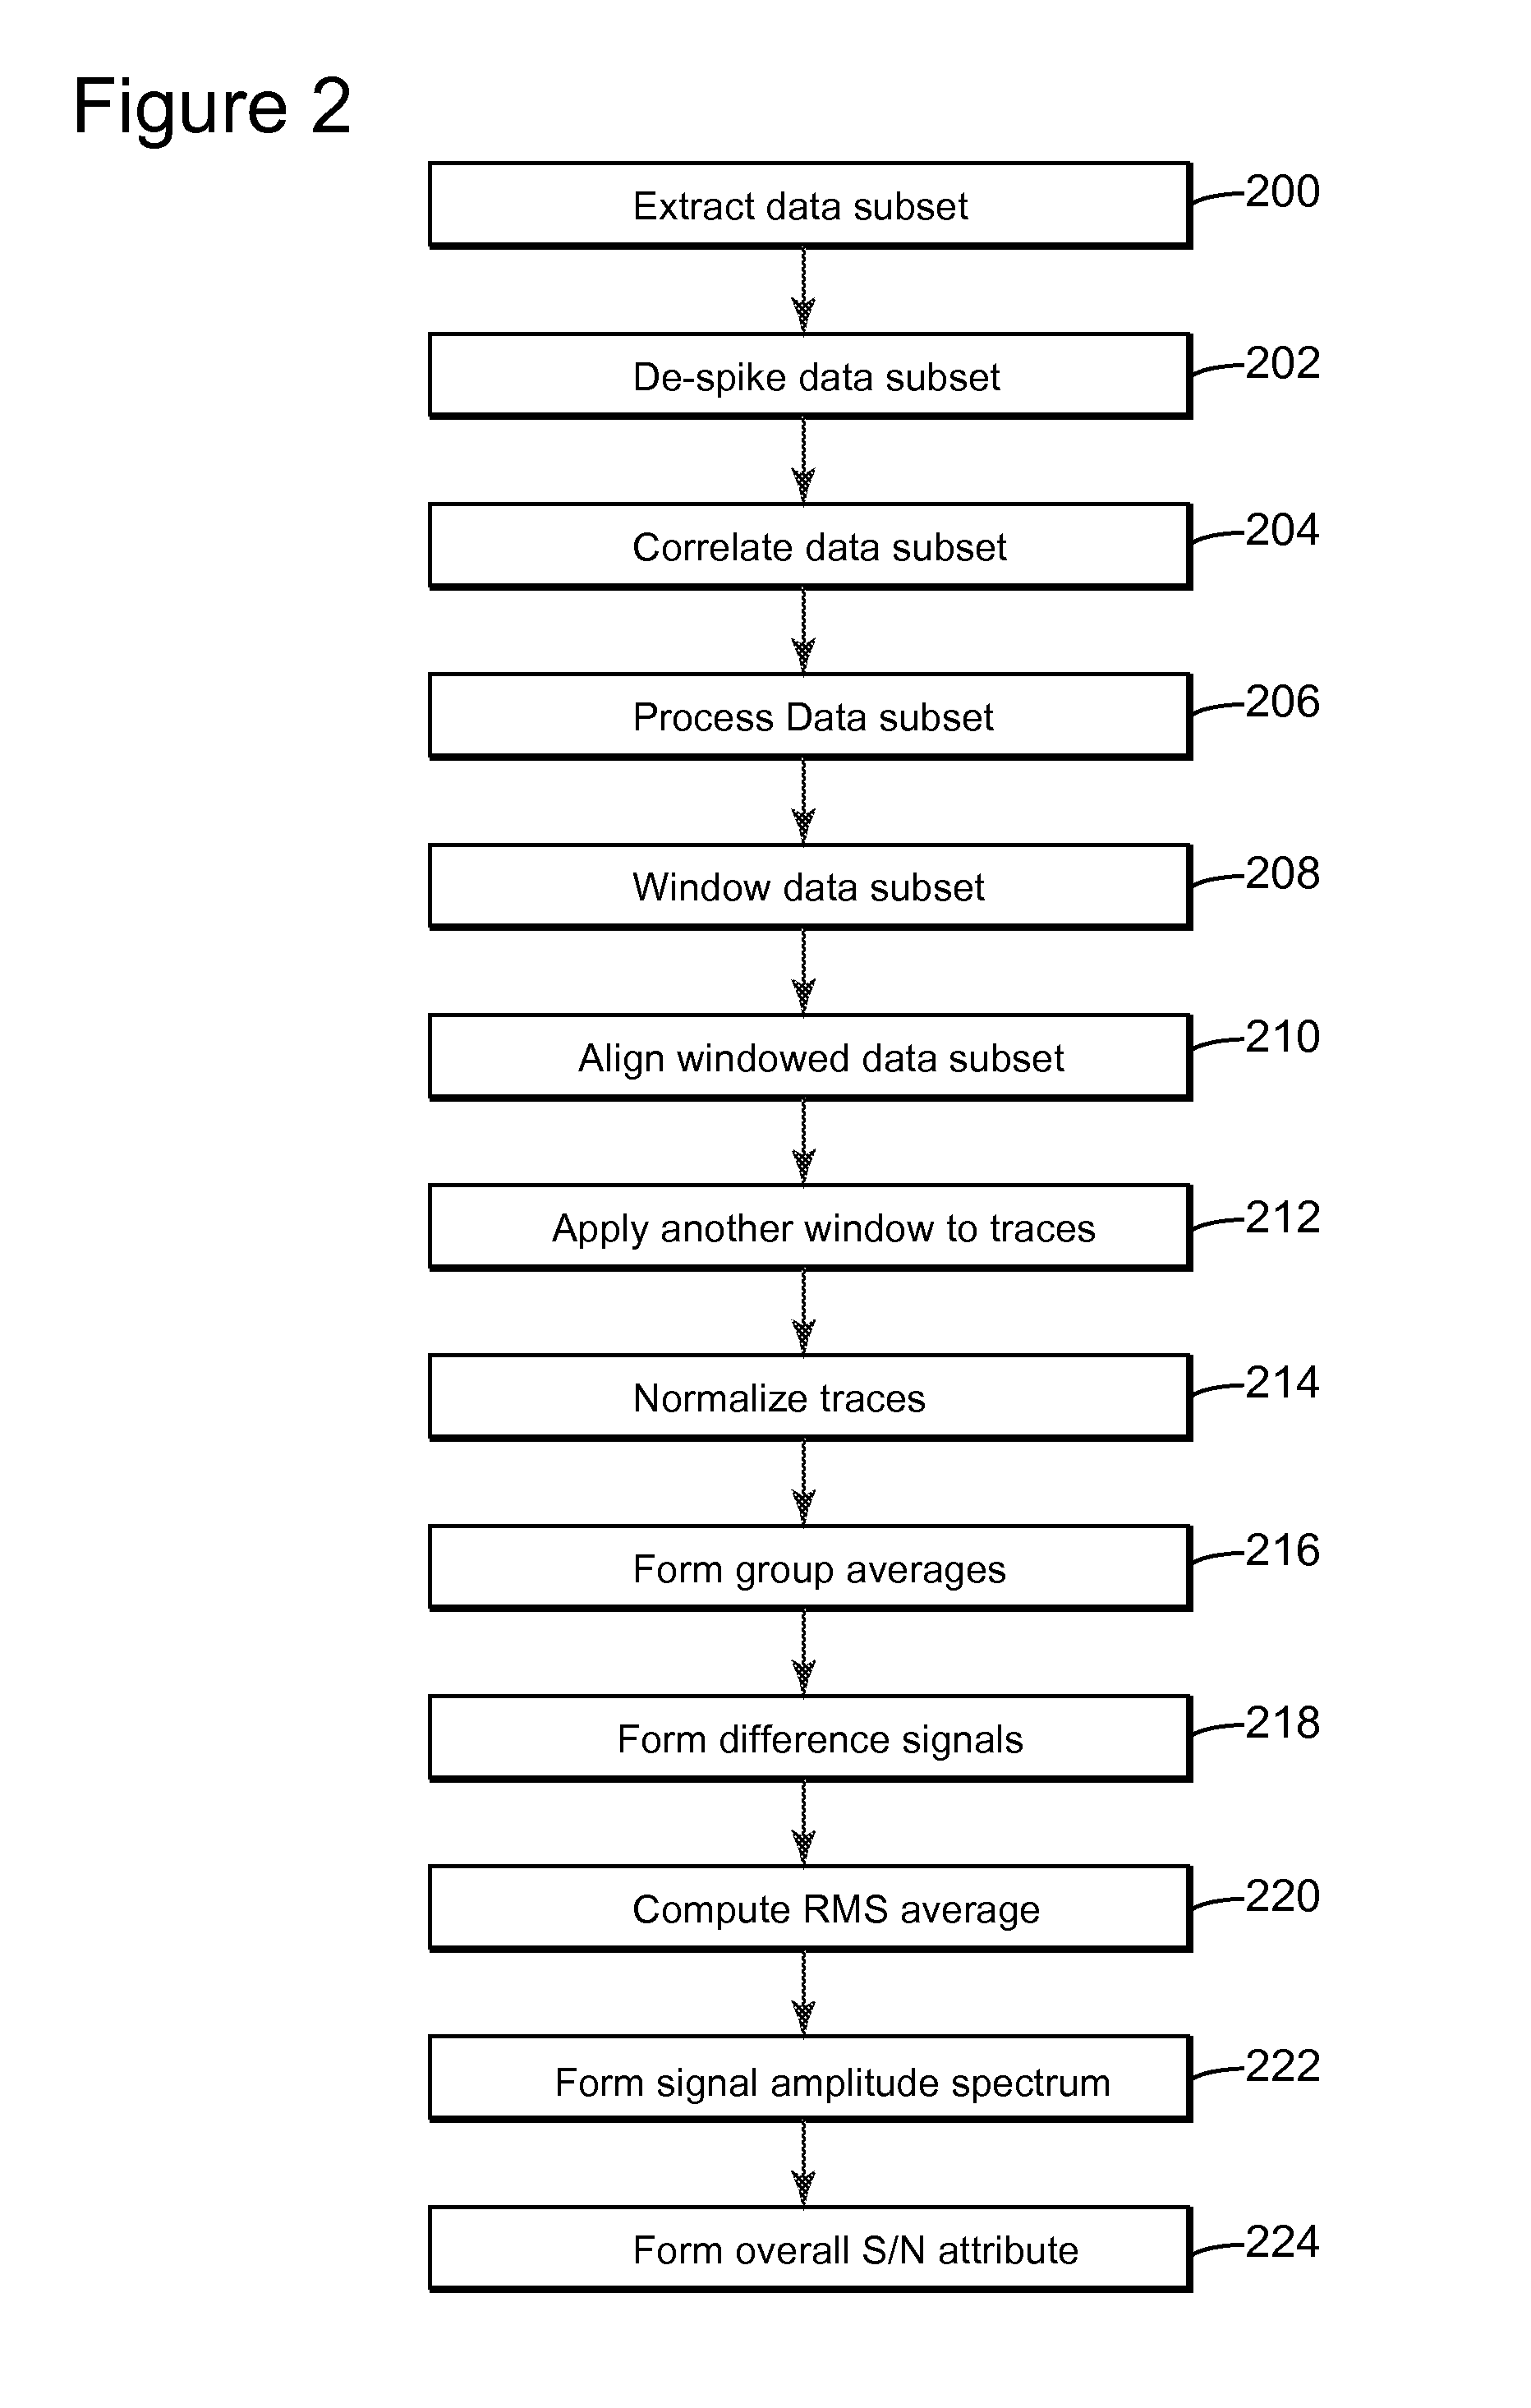 Adaptive sweep method and device for seismic exploration